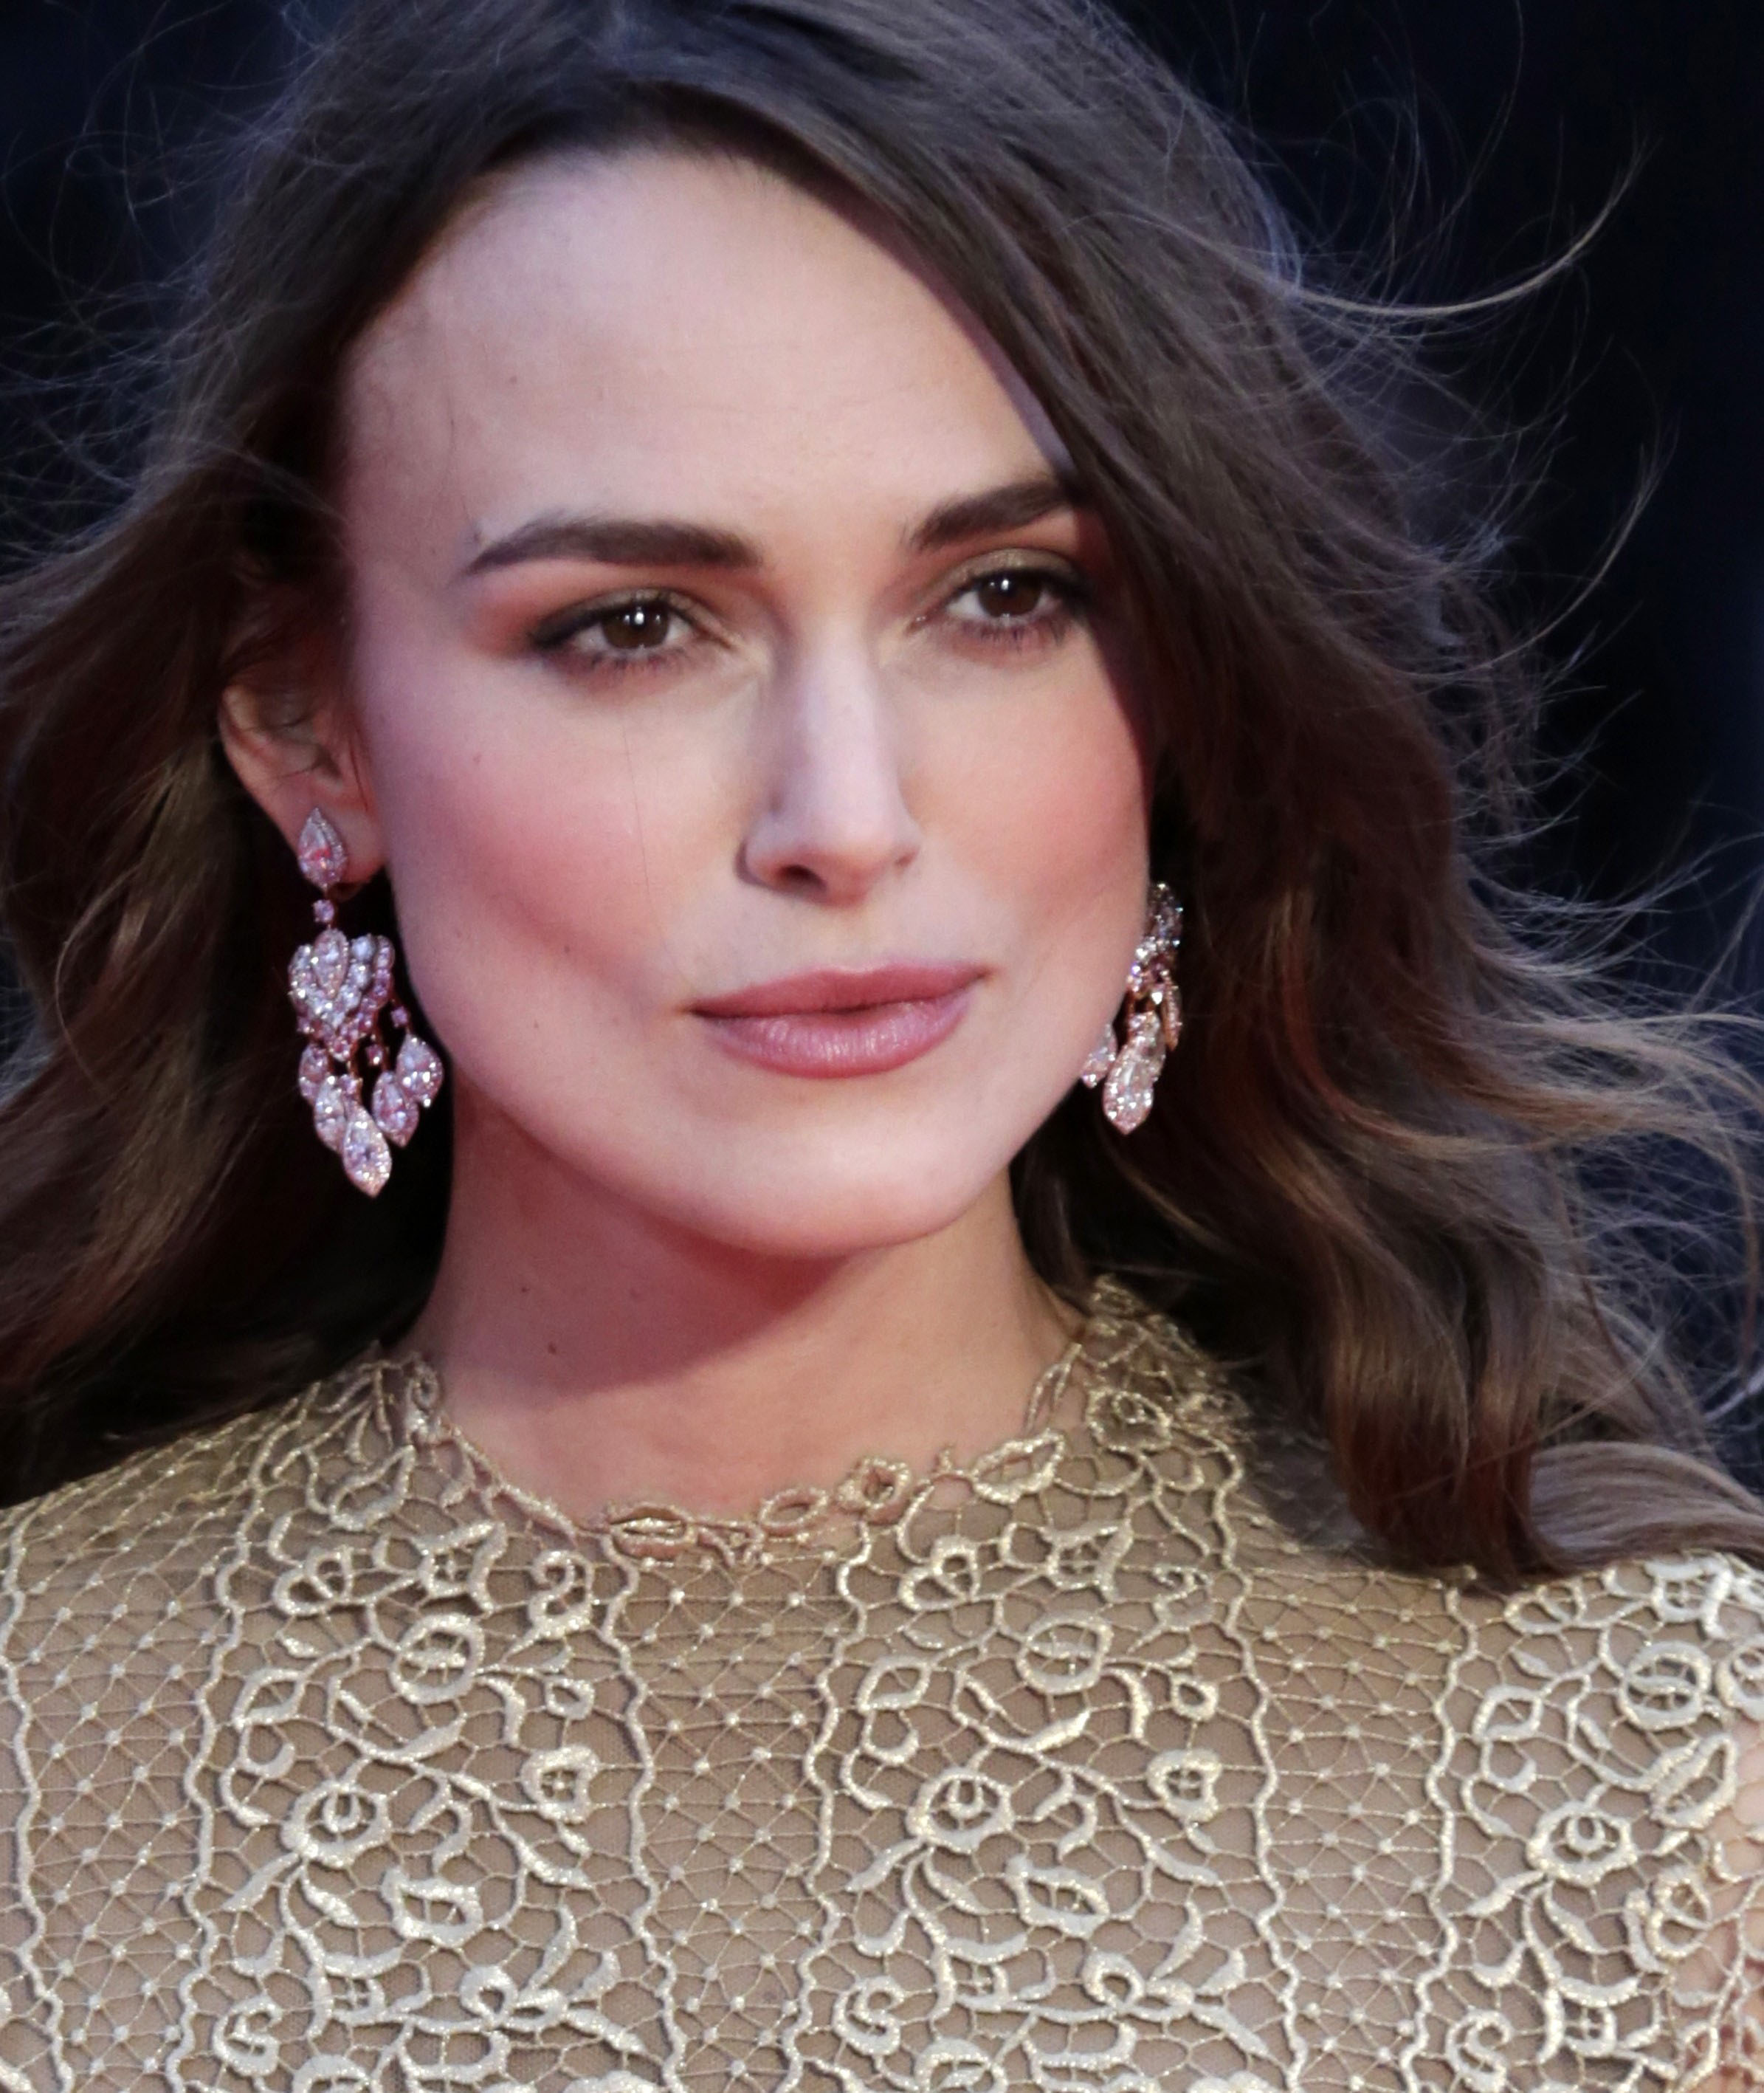 Keira Knightley attends a screening of 'The Imitation Game' in London, England on Oct. 8, 2014 (Anadolu Agency&amp;mdash;Getty Images)